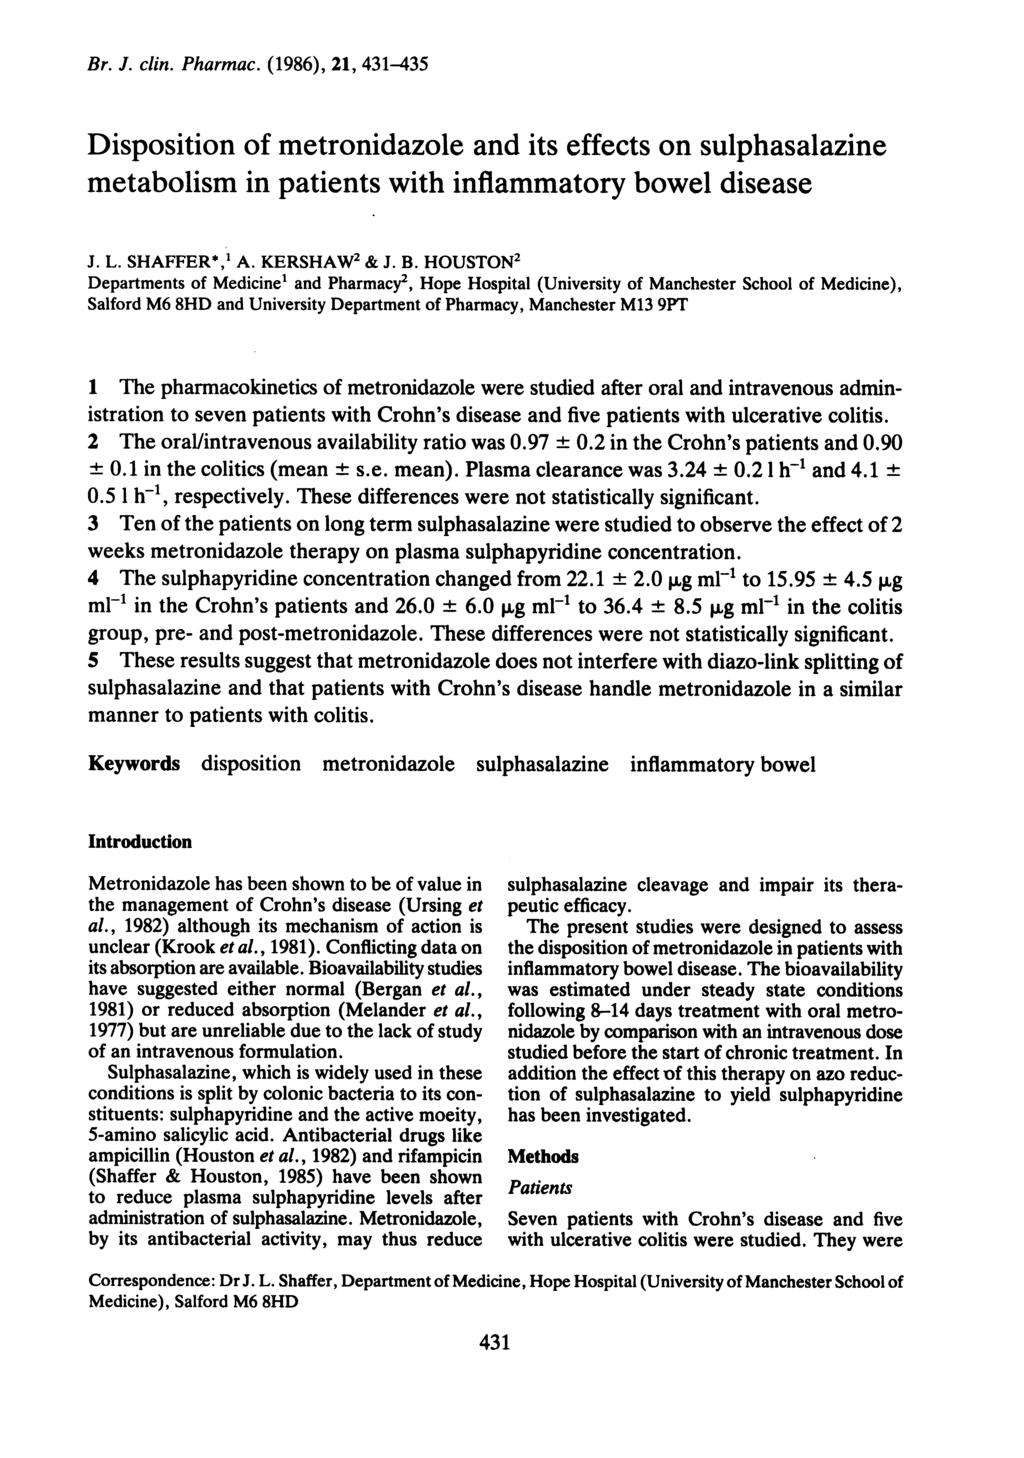 Br. J. clin. Pharmac. (1986), 21, 431-435 Disposition of metronidazole and its effects on sulphasalazine metabolism in patients with inflammatory bowel disease J. L. SHAFFER*,' A. KERSHAW2 & J. B.